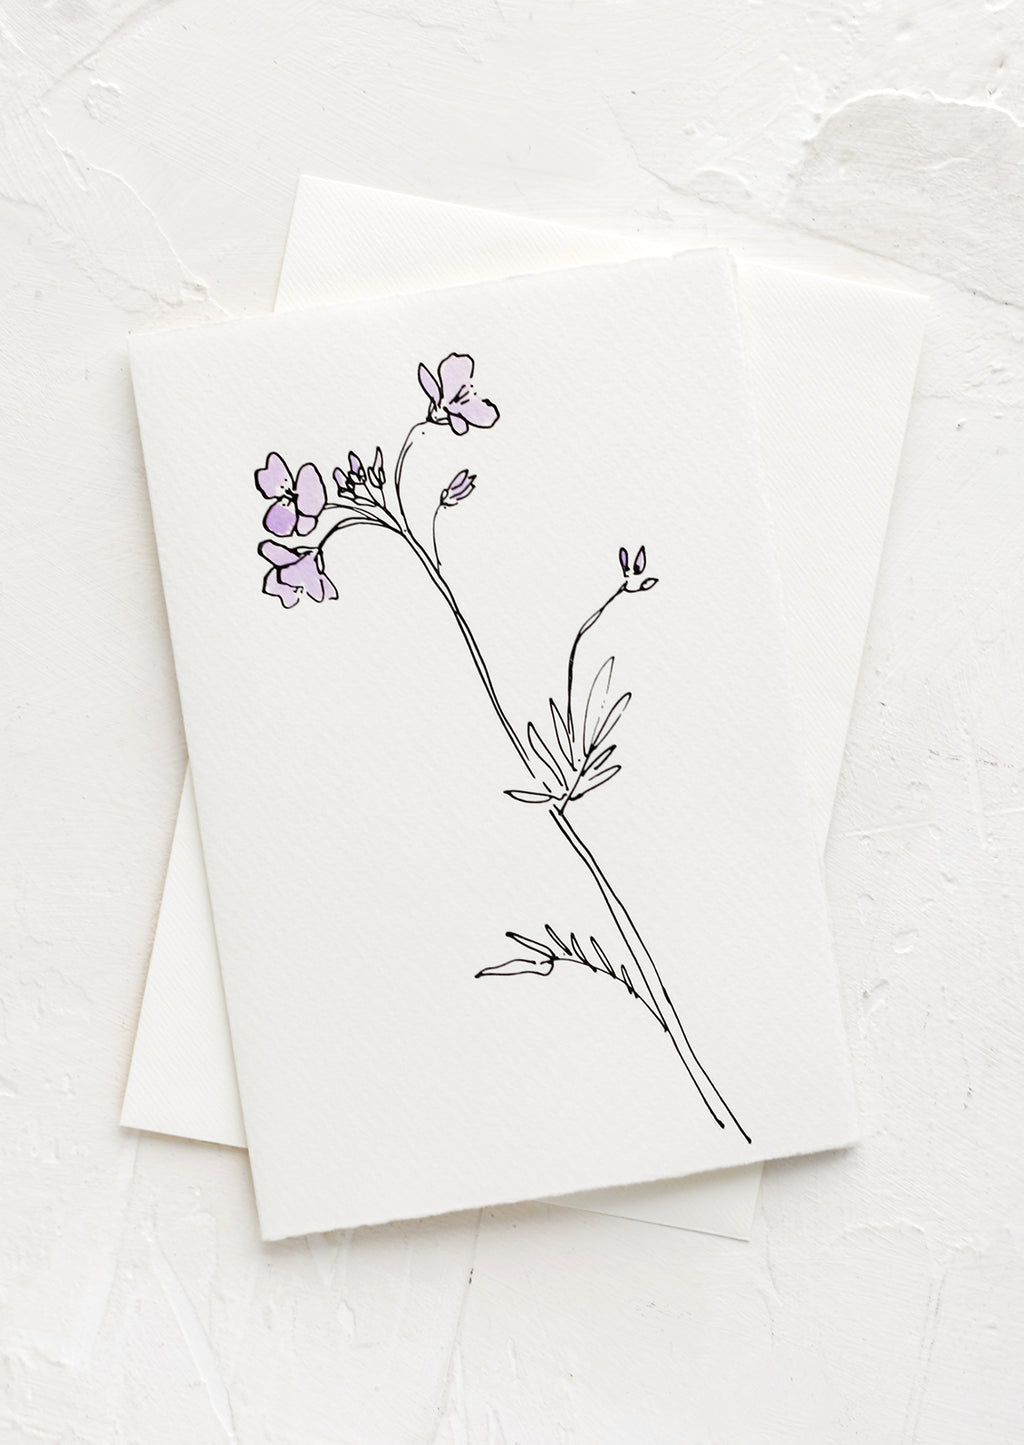 Cuckoo Flower: A white greeting card with a hand painted illustration of a cuckoo flower.